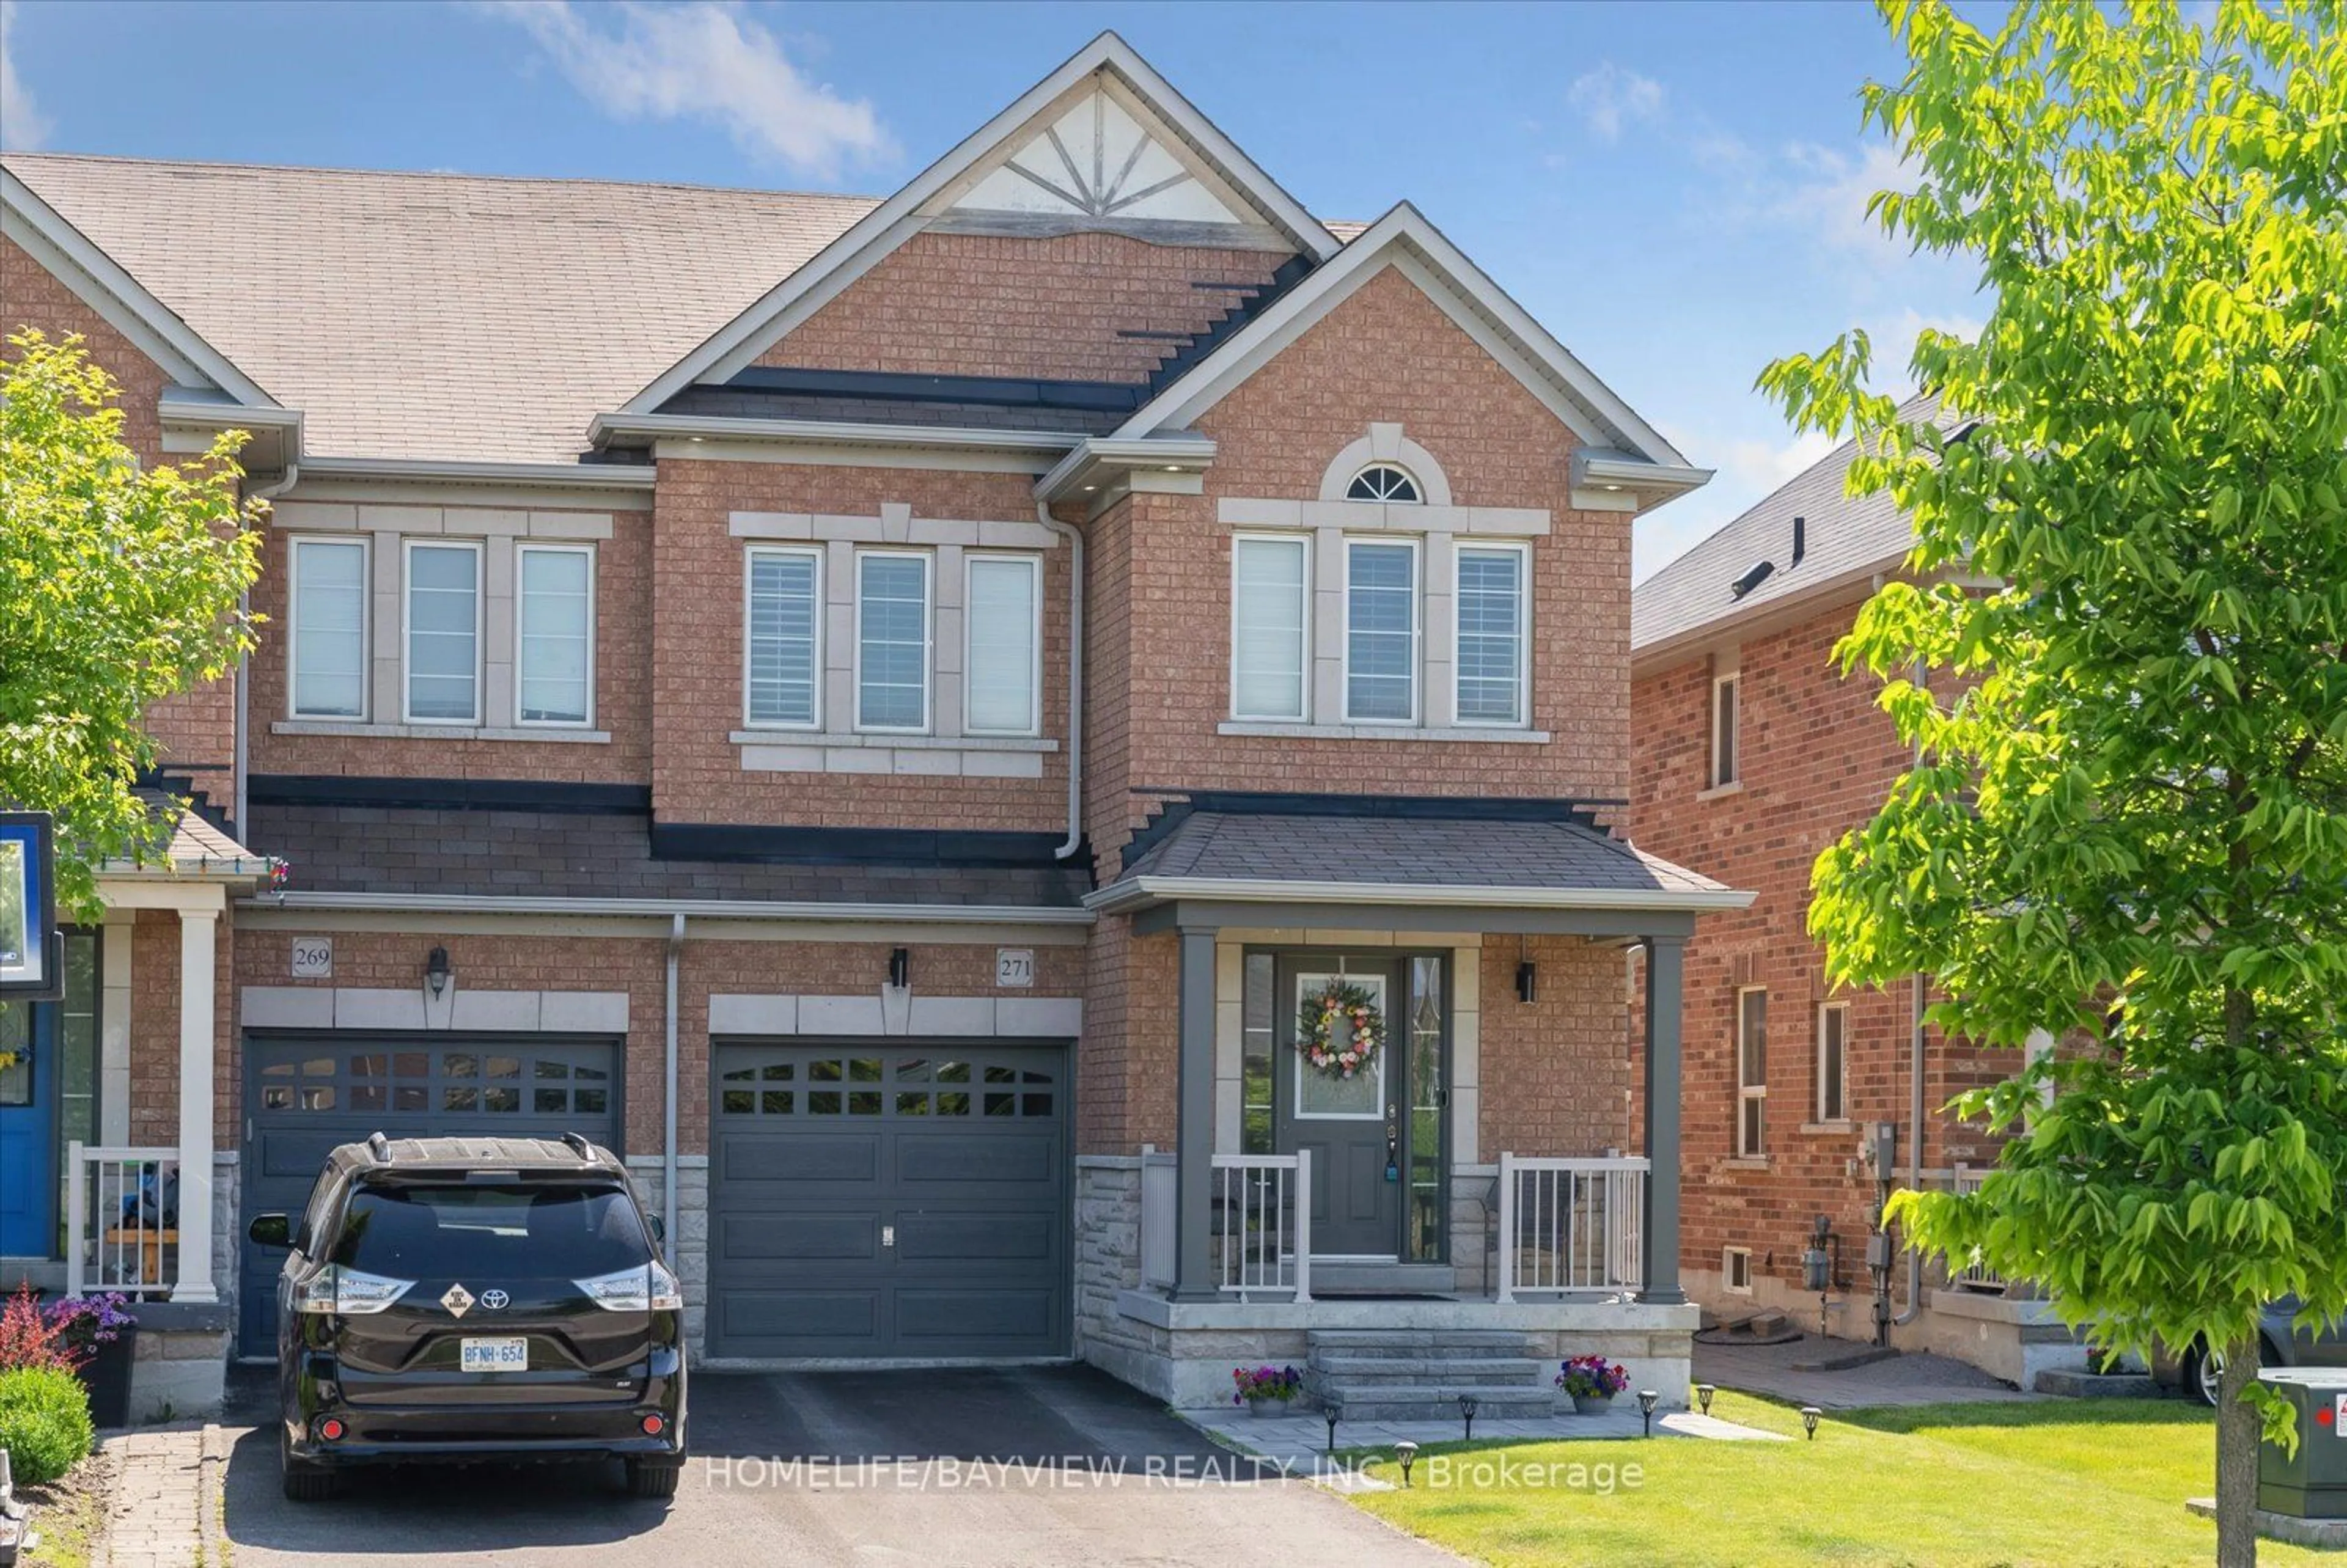 Home with brick exterior material for 271 Richard Underhill Ave, Whitchurch-Stouffville Ontario L4A 0Y8